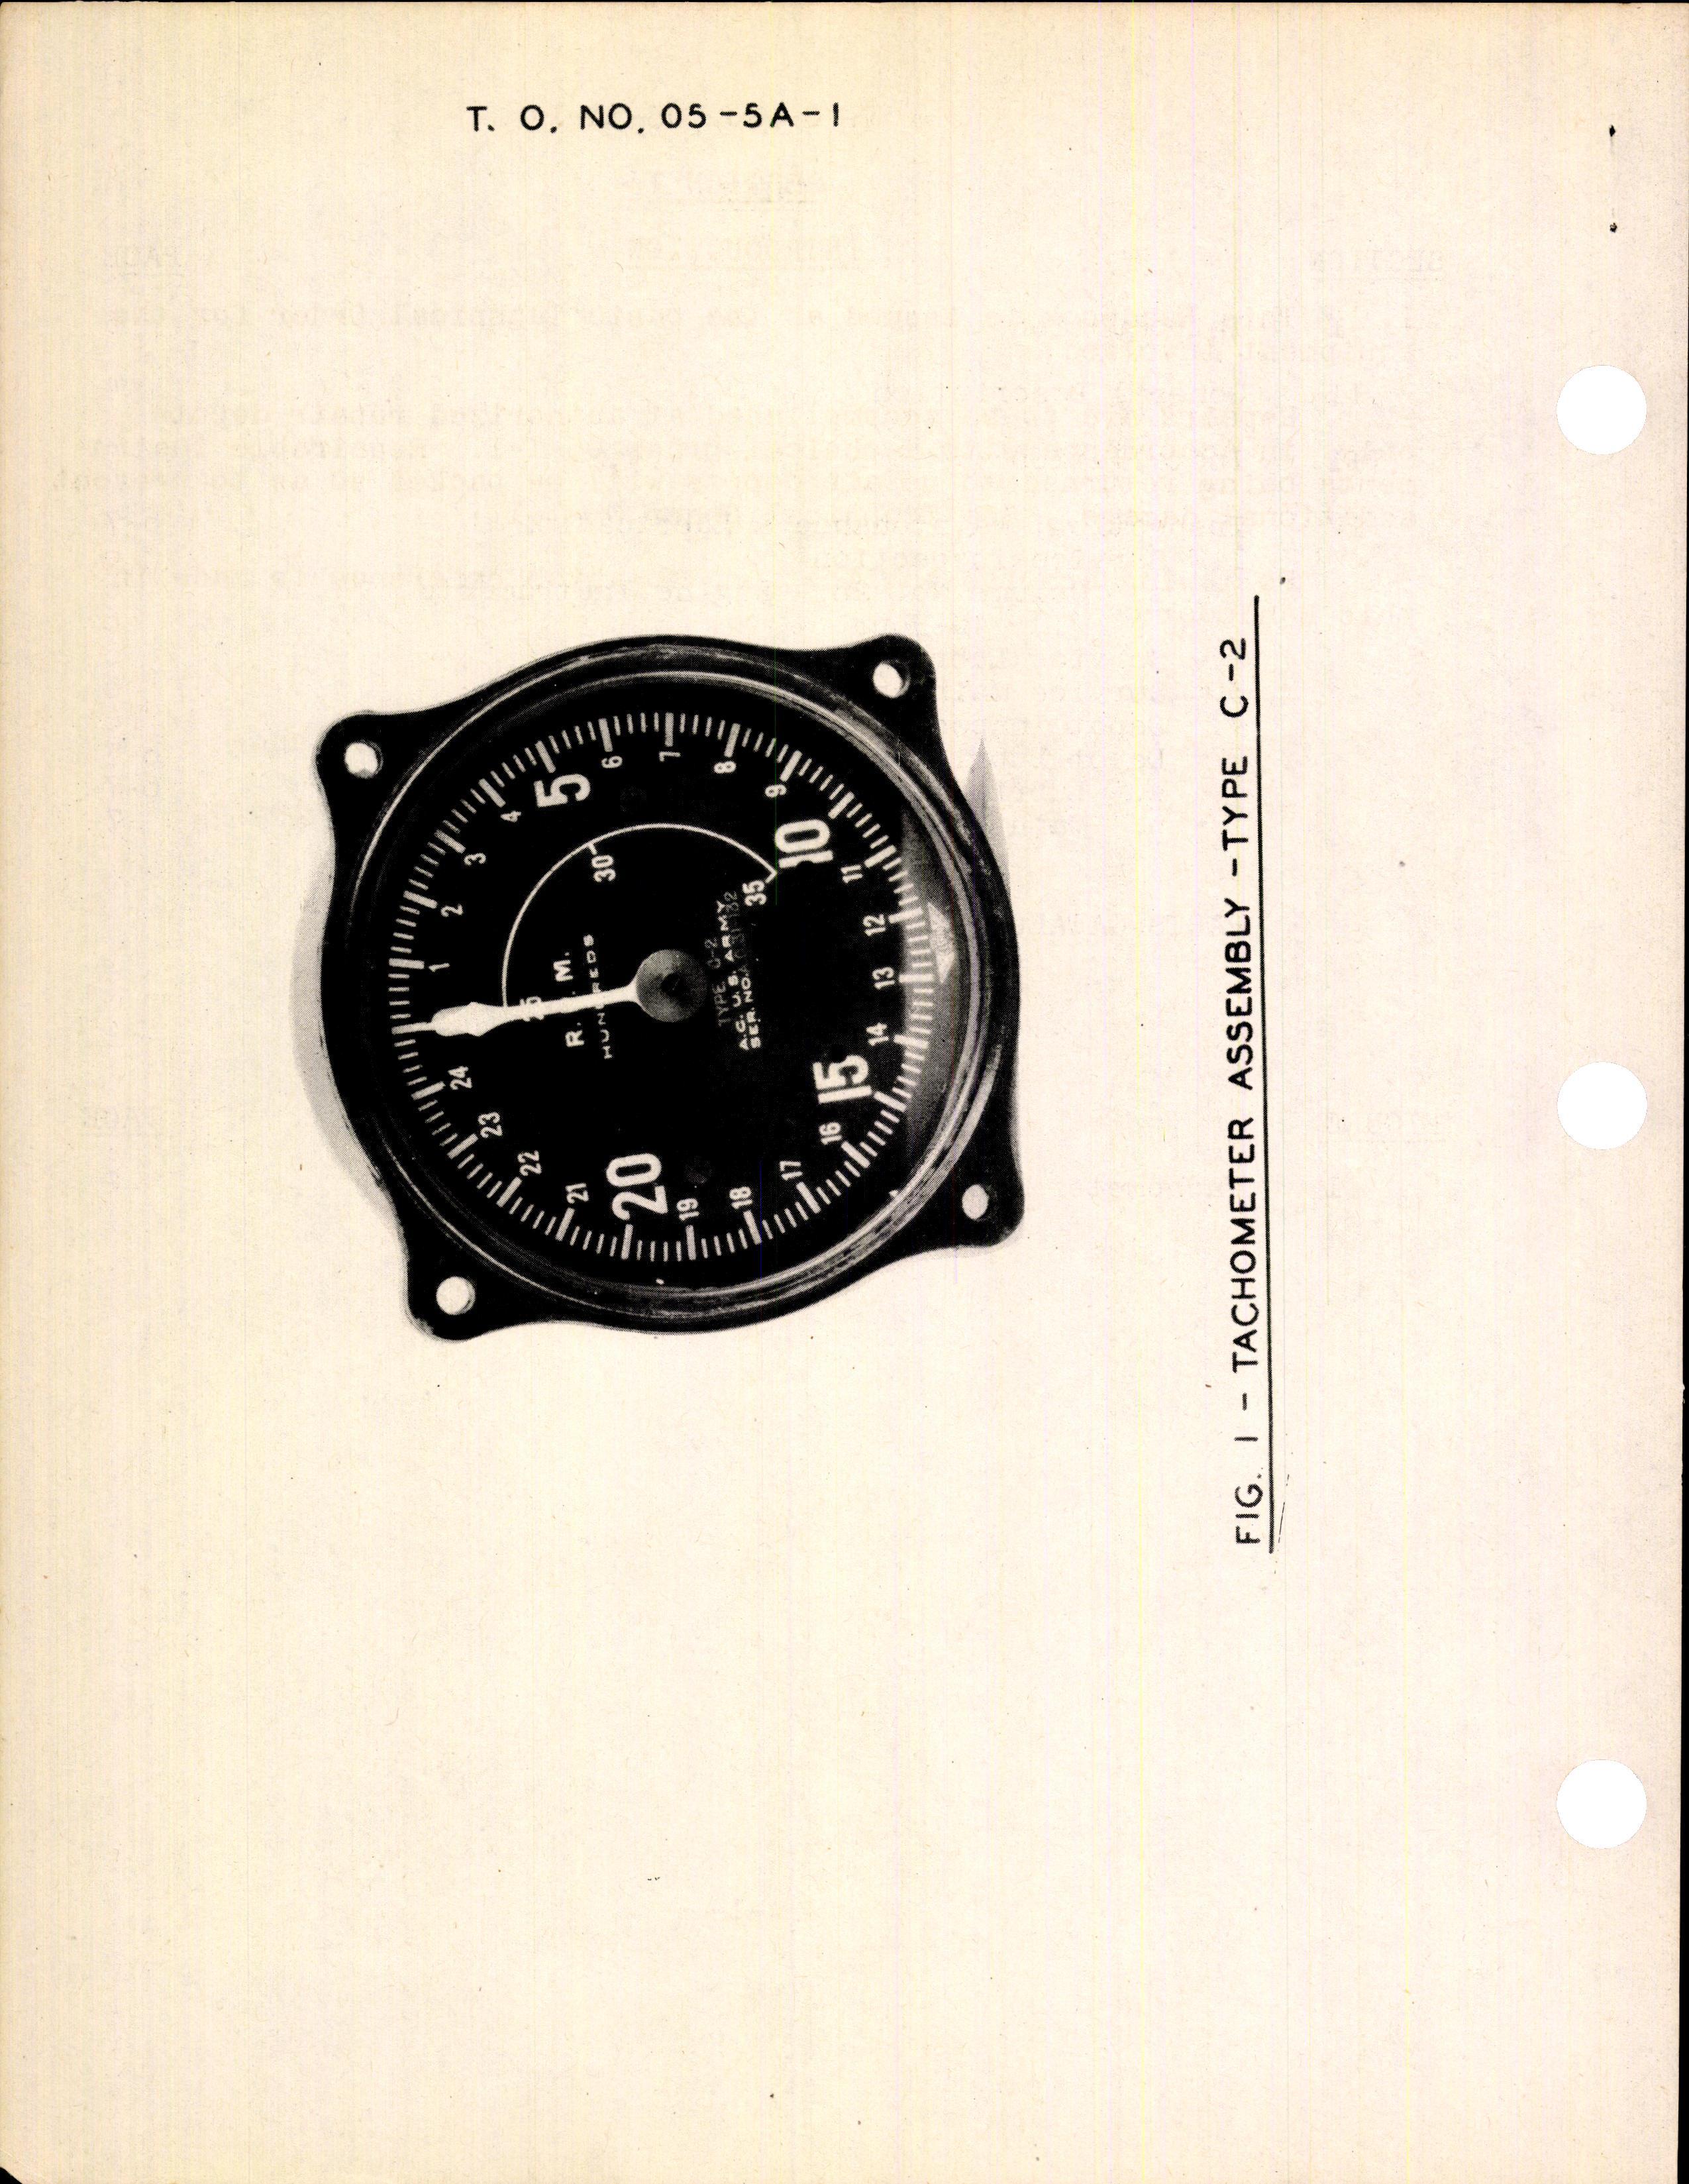 Sample page 4 from AirCorps Library document: Handbook of Instructions with Parts Catalog for the Type C-2 Tachometer